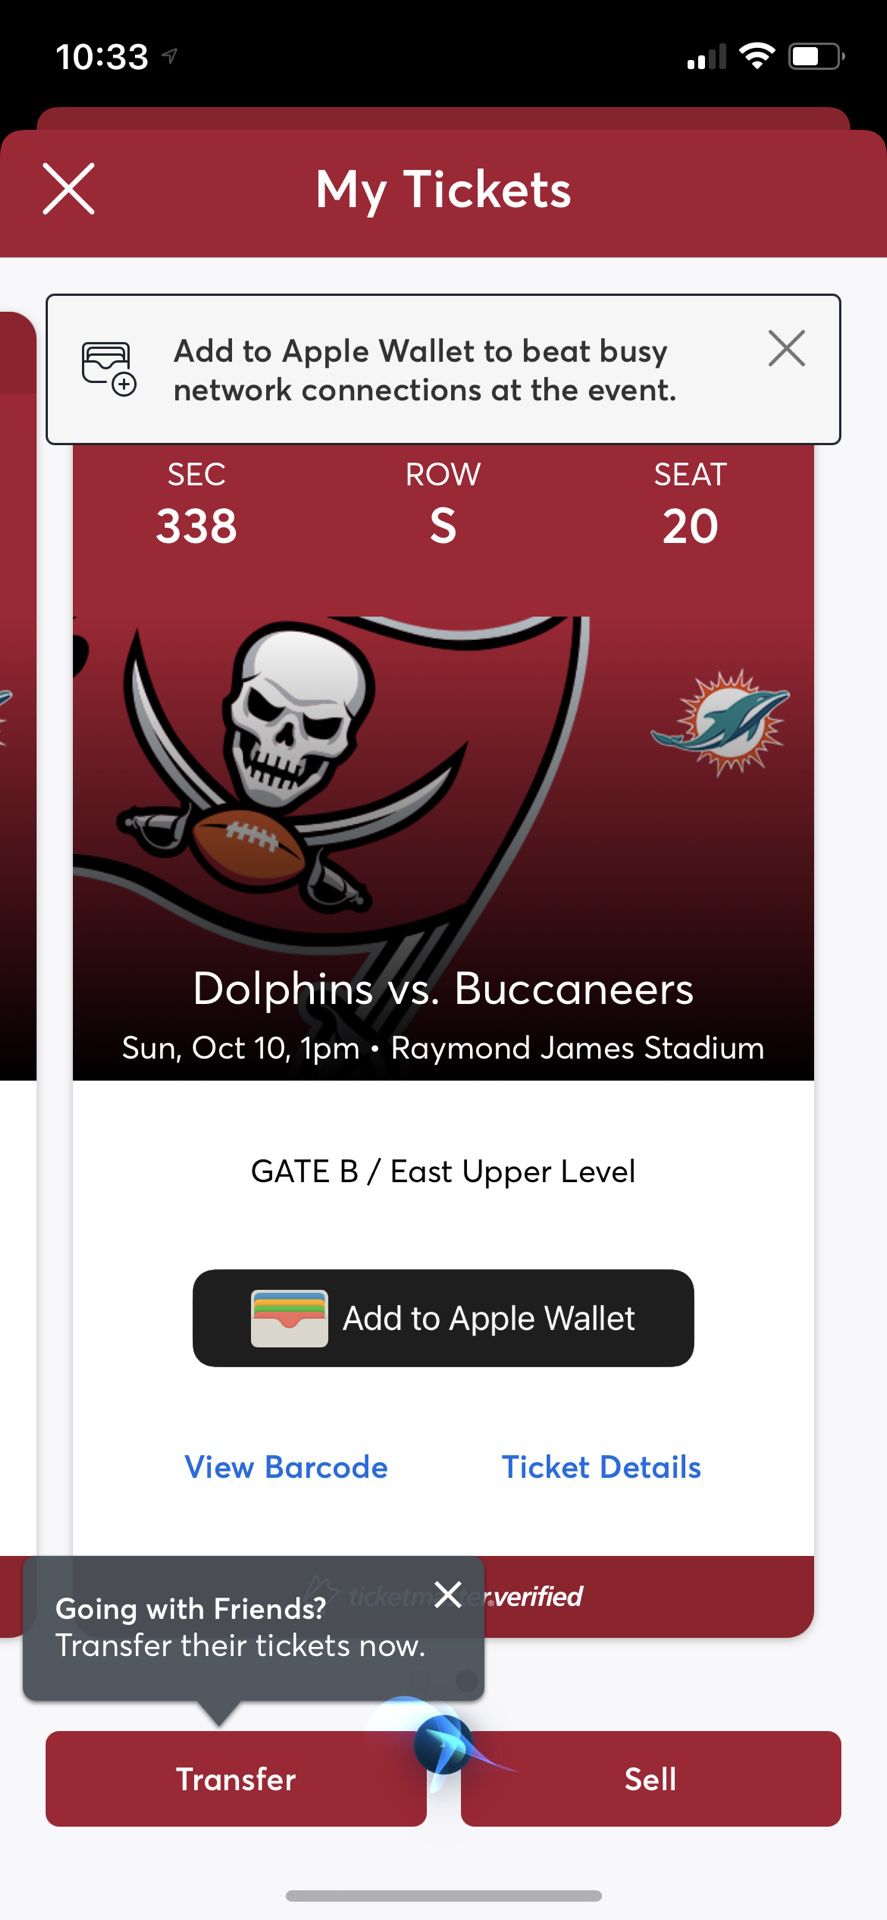 Bucs/Dolphins Game, Sunday Oct 10th, 1pm